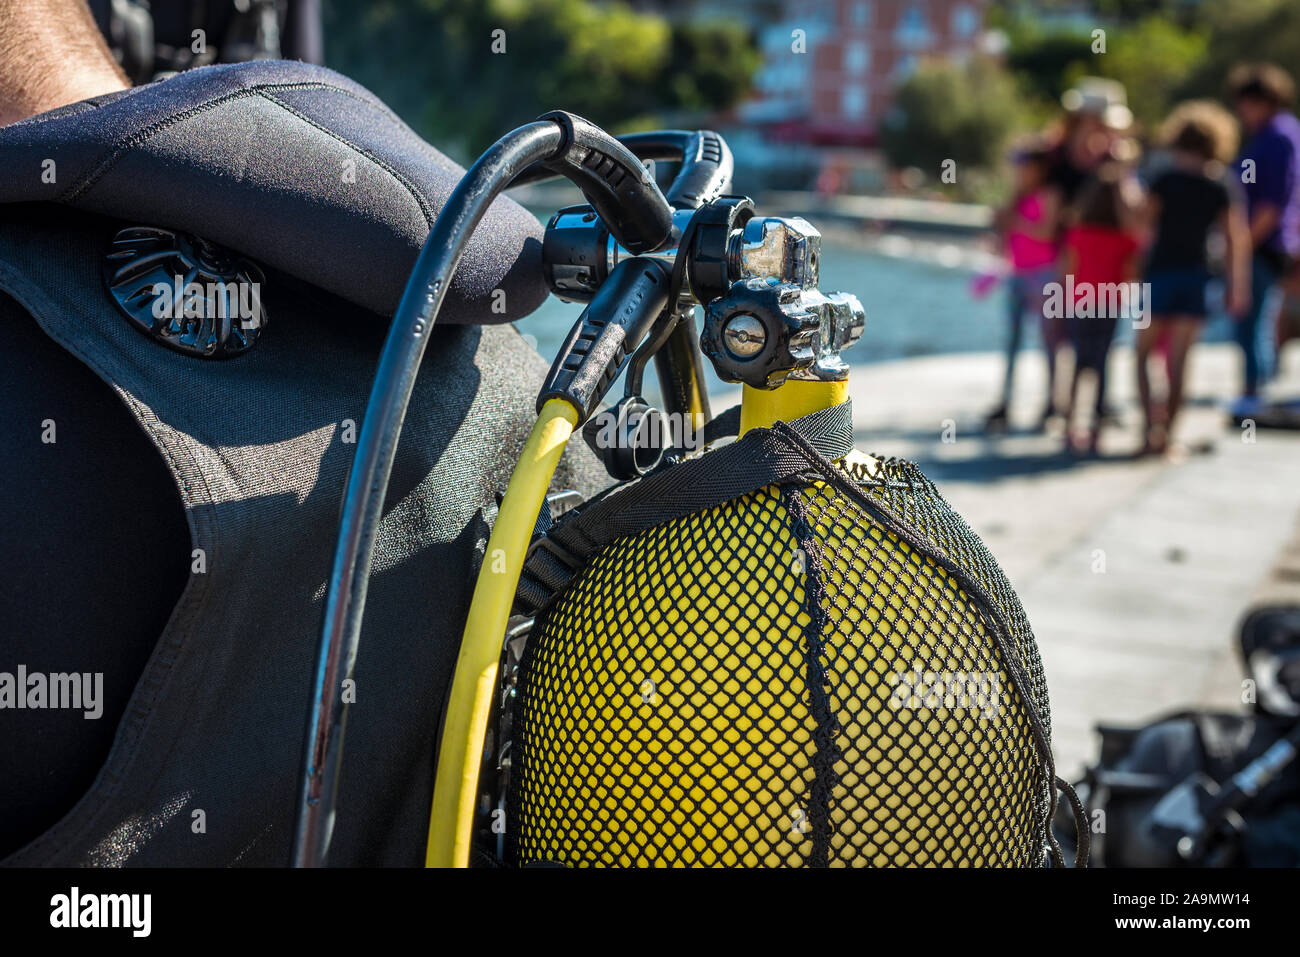 Scuba diver getting ready for scuba diving on the beach. Setting up scuba gear and equipment - steel tank or cylinder, BCD, regulators and getting dre Stock Photo